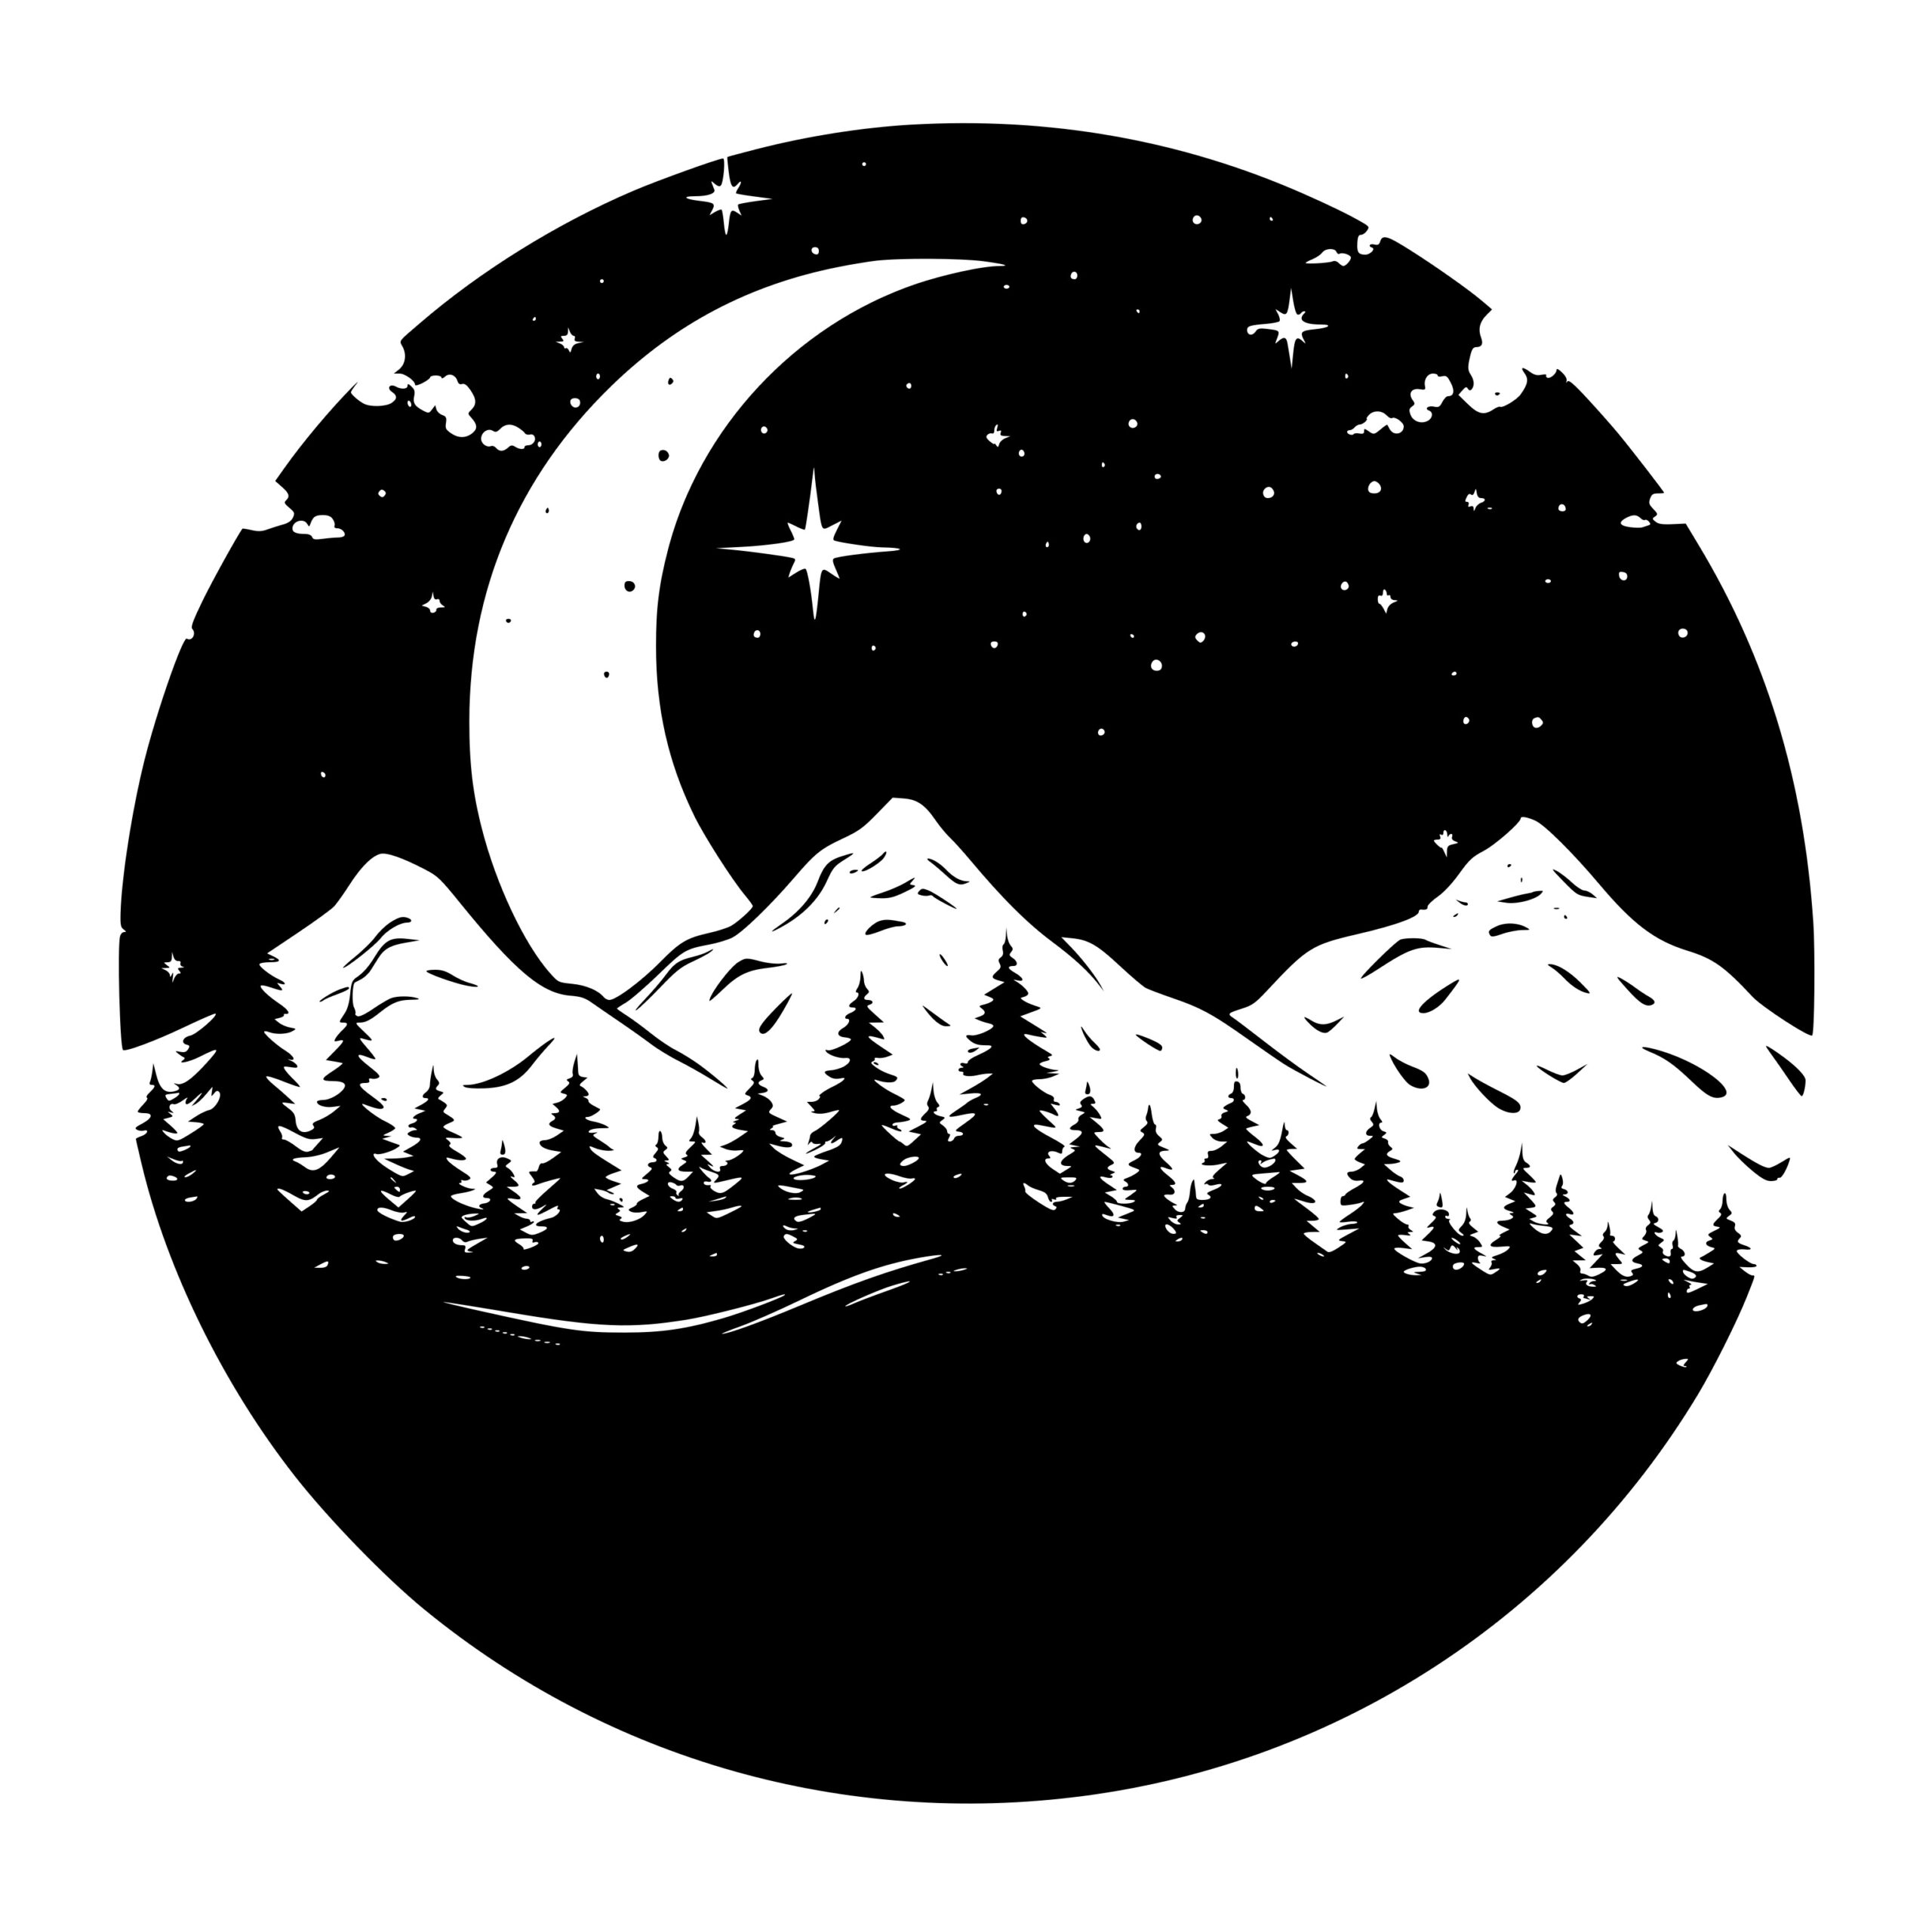 Majestic Moonlit Peaks - SVG, PNG, DXF Files for Cricut, Silhouette ...